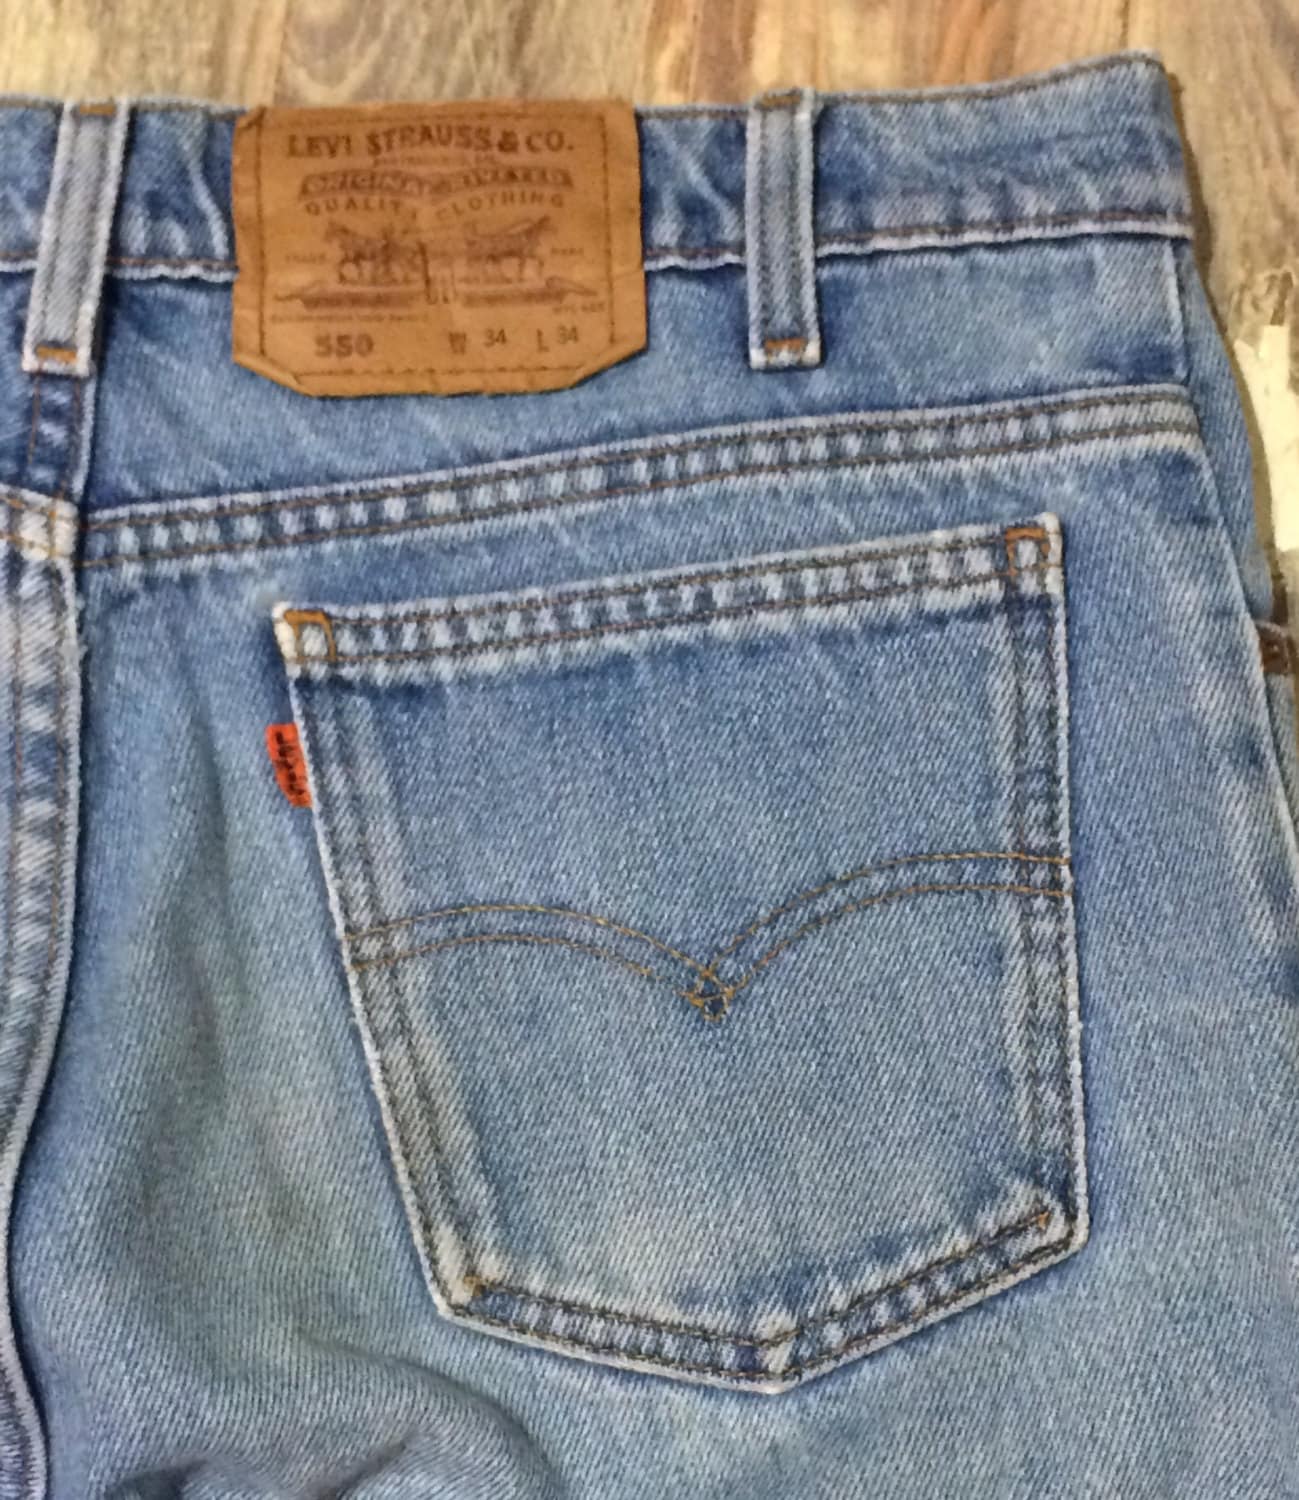 Vintage Levis Community;I Need Help On A Authenticity I Thrifted This Pair  Of Orange Tab The Tag Says Assembled In Guatemala, And The Orange Tab  Doesn't Say LeVIS, Which Threw 